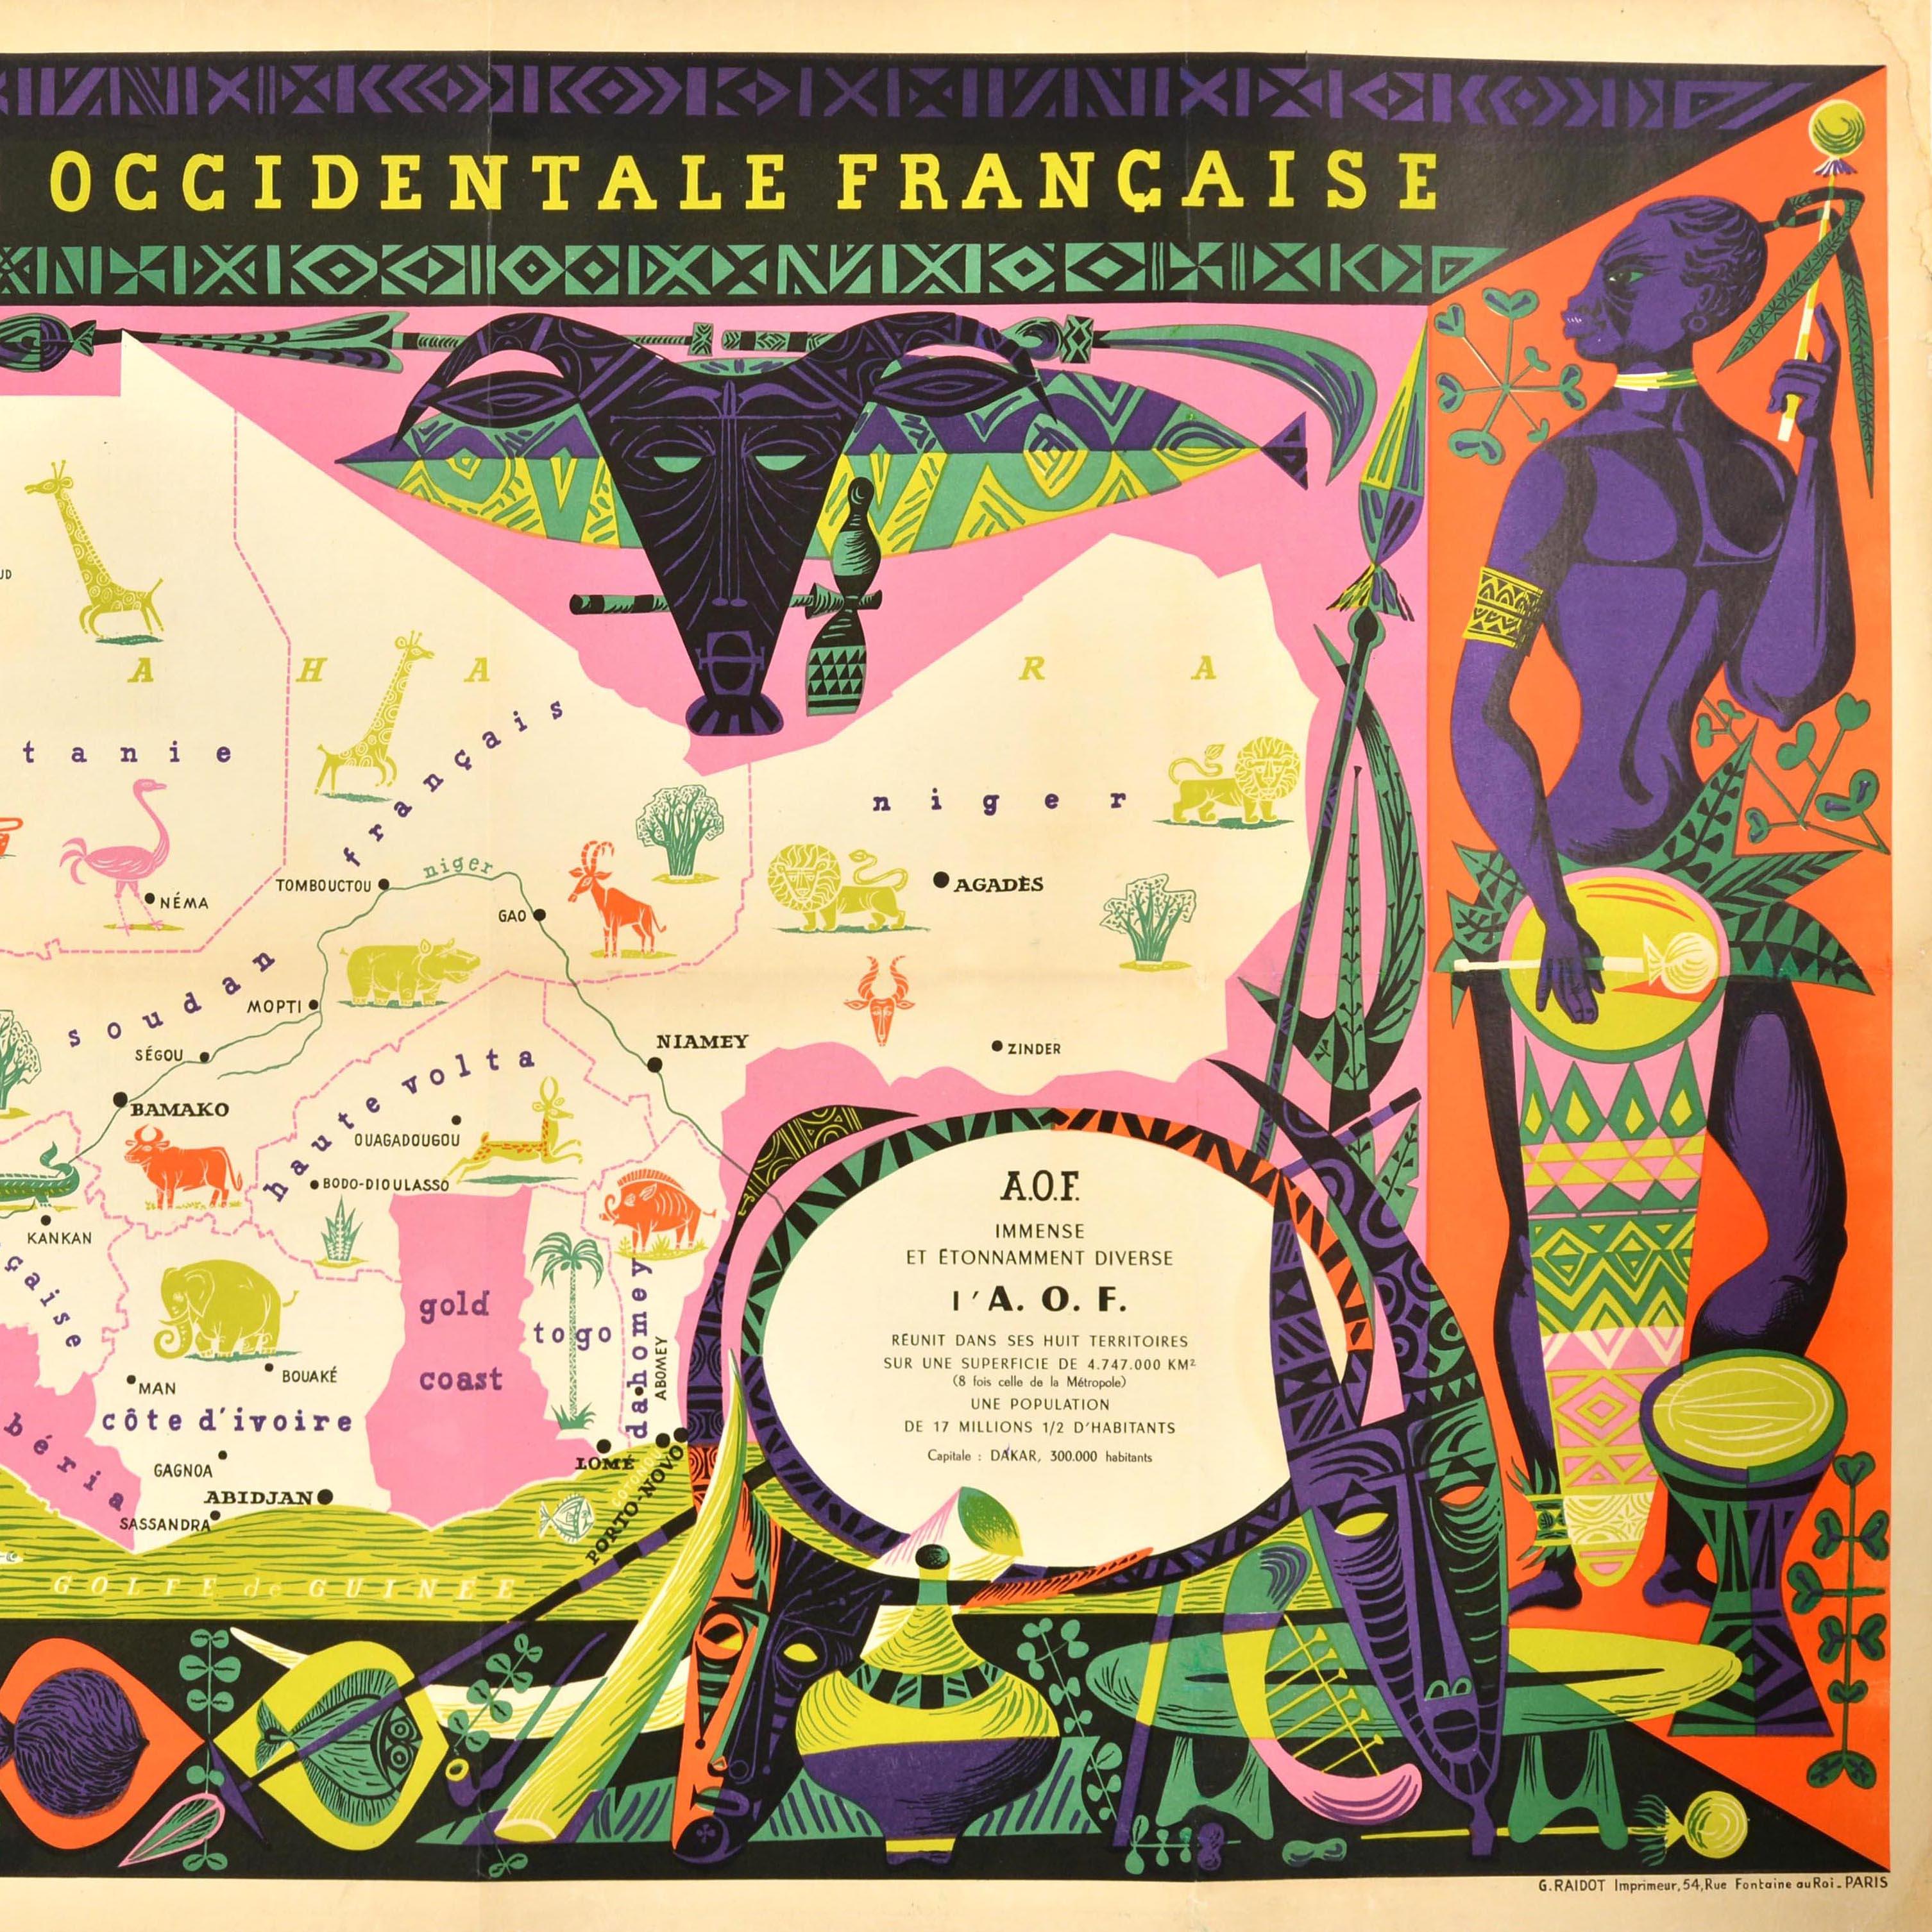 Original vintage poster featuring an illustrated map of French West Africa / Afrique Occidentale Francaise marking the capital cities, towns, ports, Sahara Desert and rivers in Mauritania Senegal Guinea Sierra Leone Liberia Cote d'Ivoire / Ivory